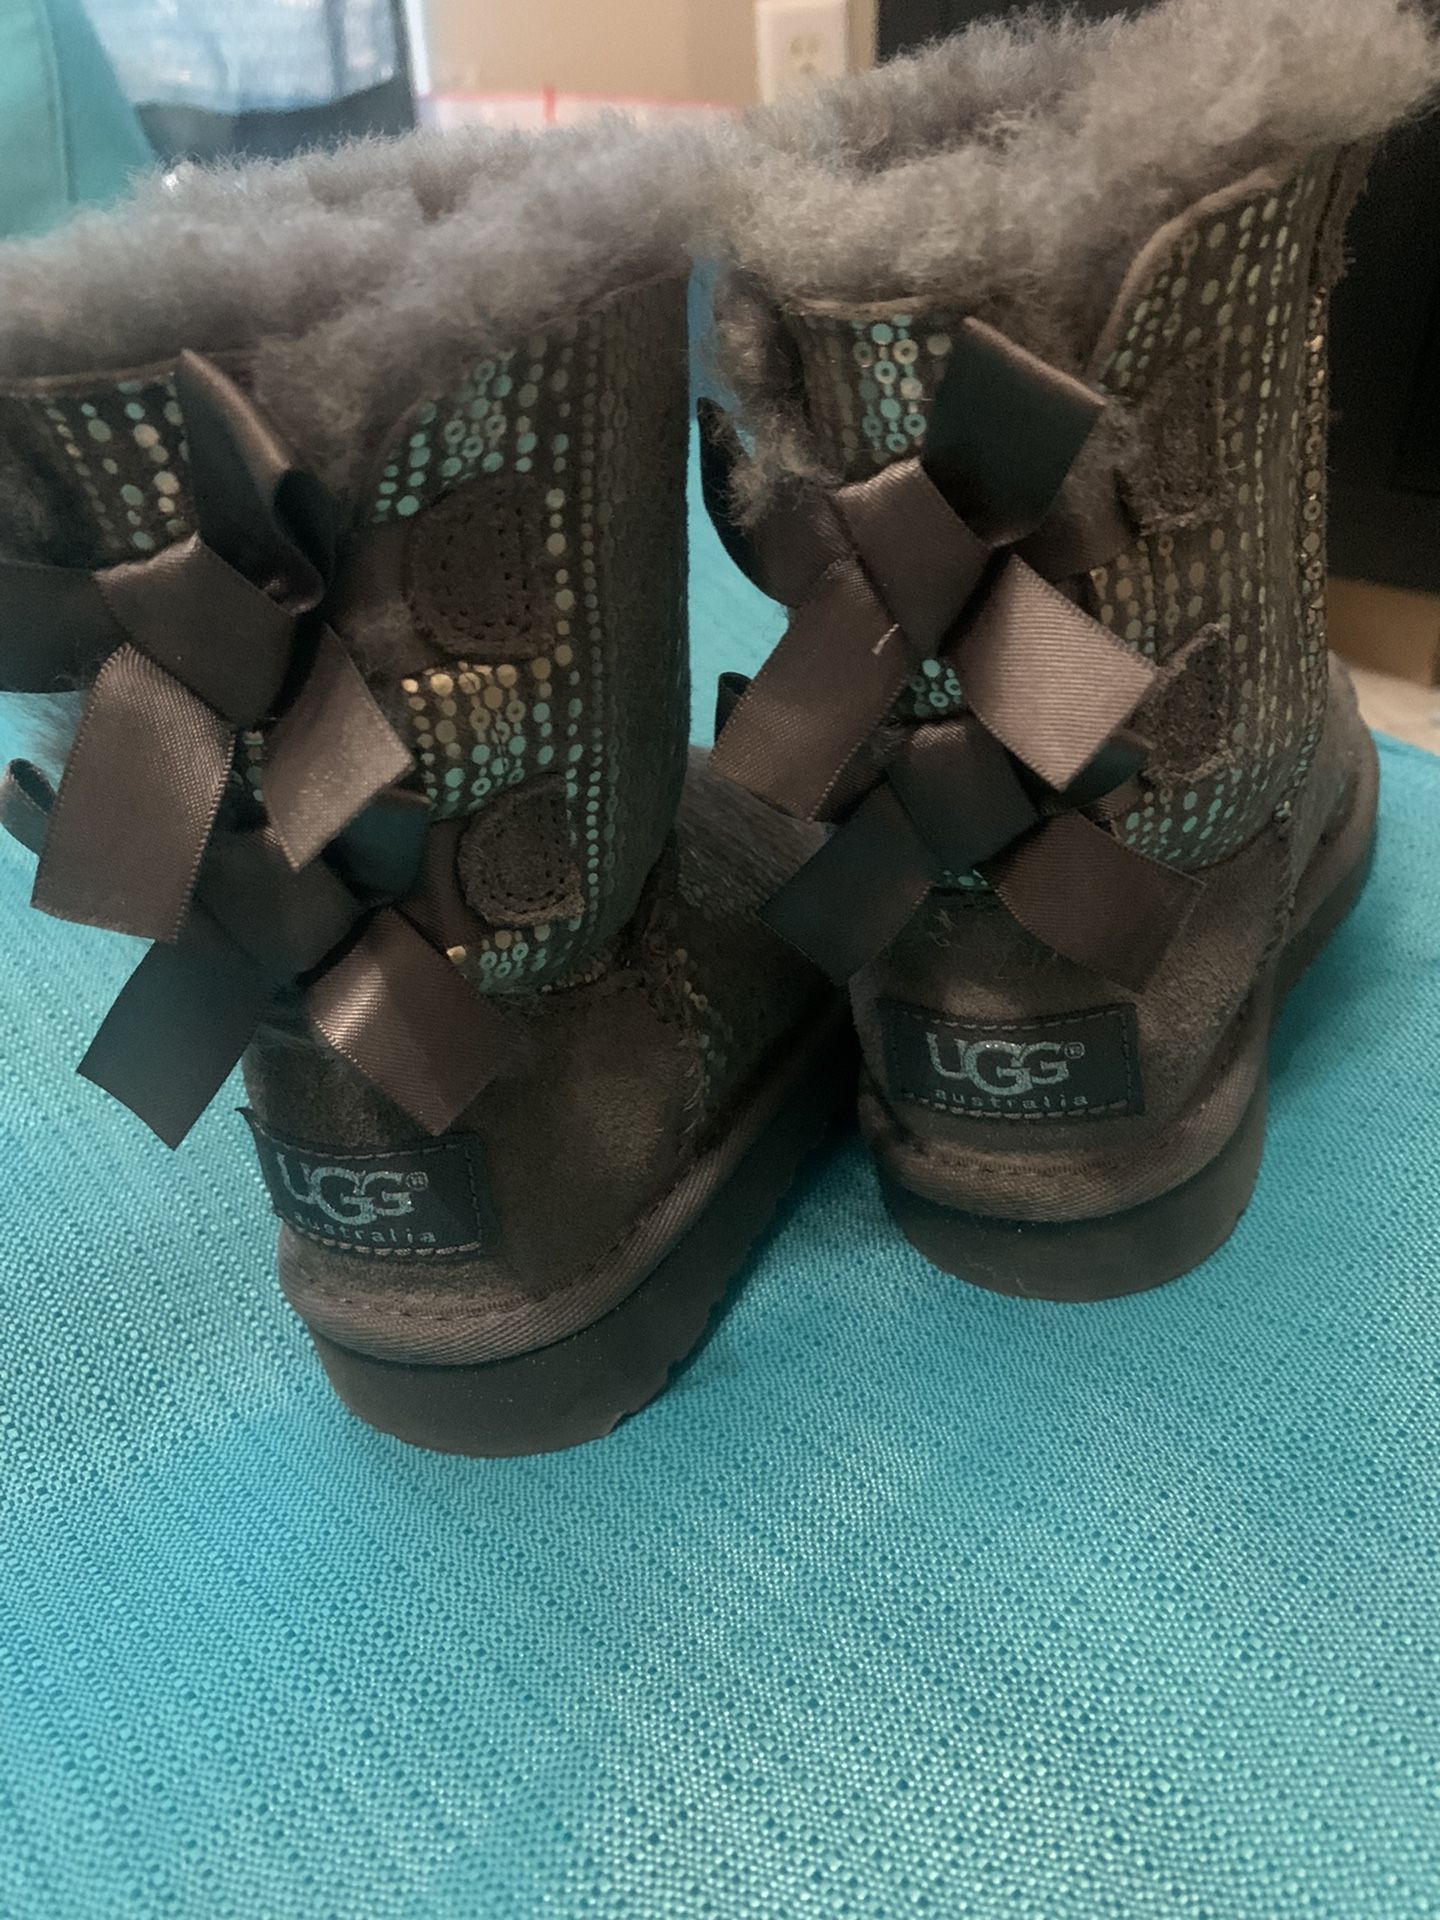 Toddler size 6 UGGs 